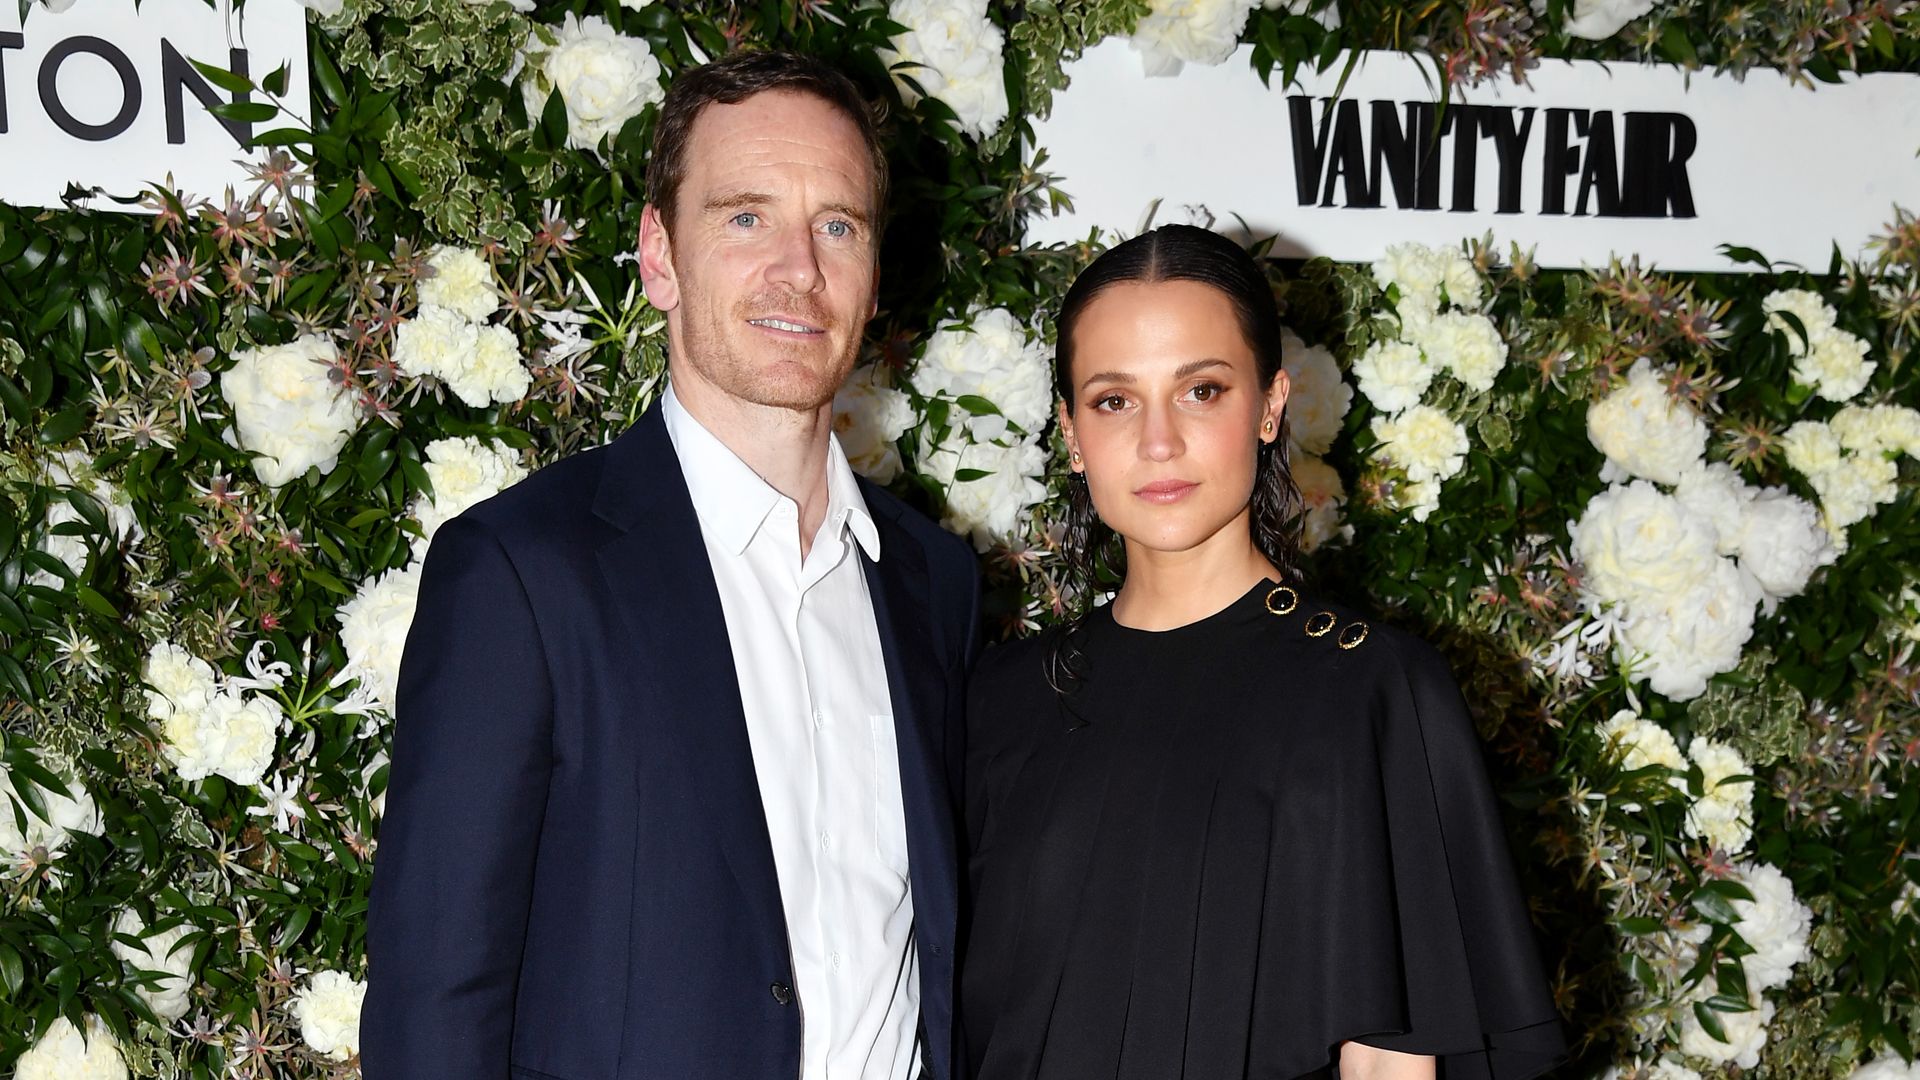 Alicia Vikander and Michael Fassbender quietly welcome second child after 'marathon' nine months